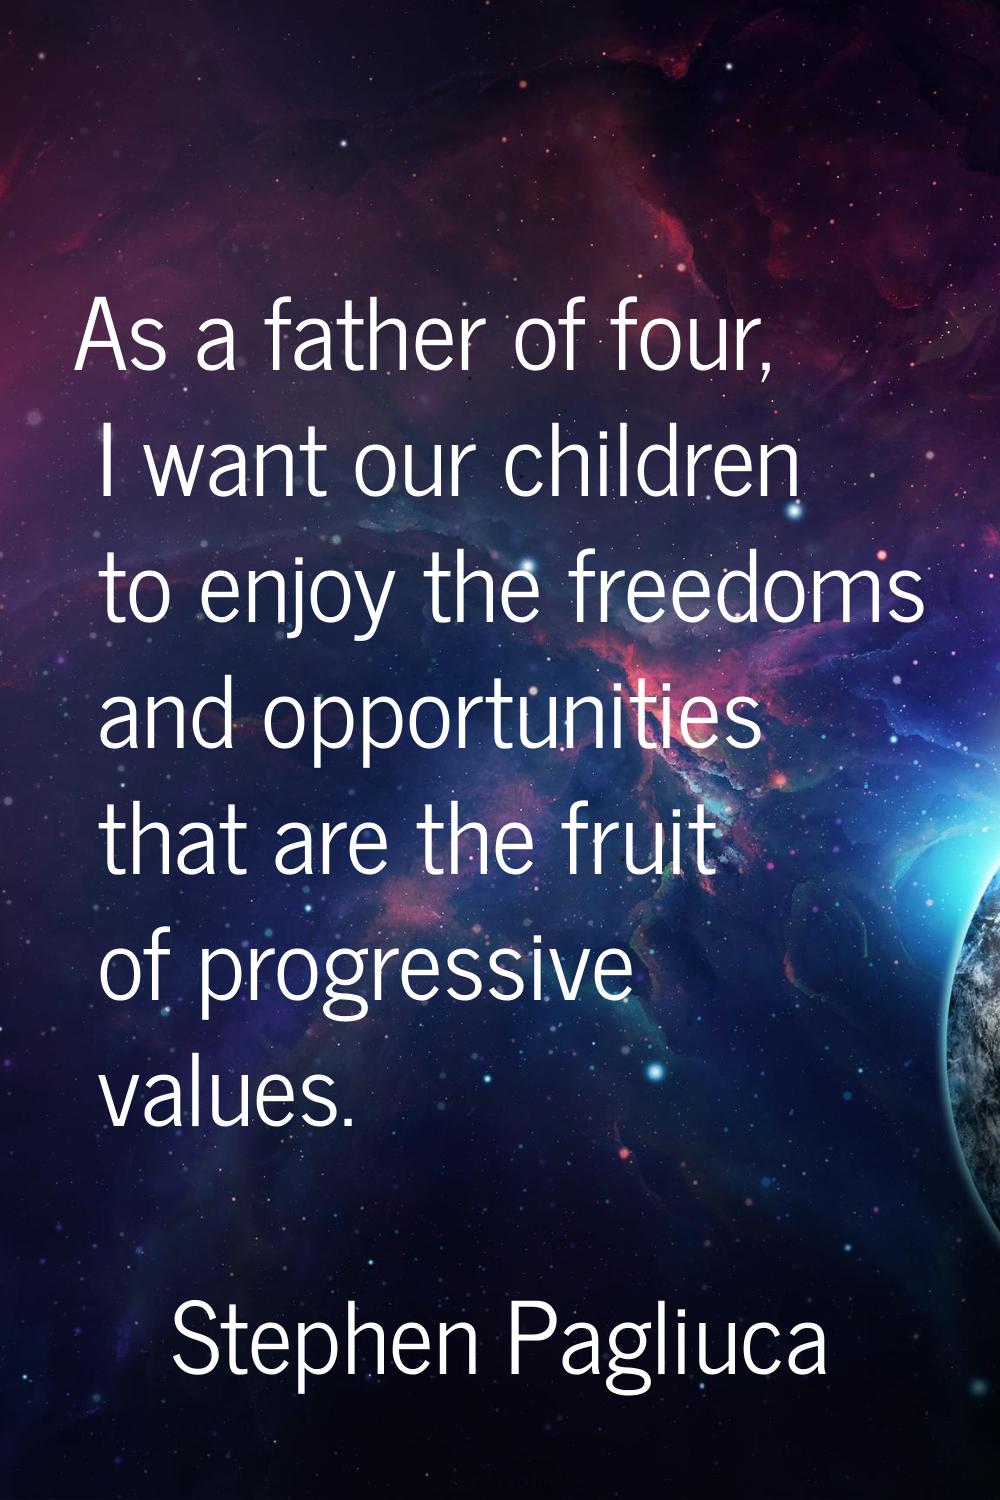 As a father of four, I want our children to enjoy the freedoms and opportunities that are the fruit